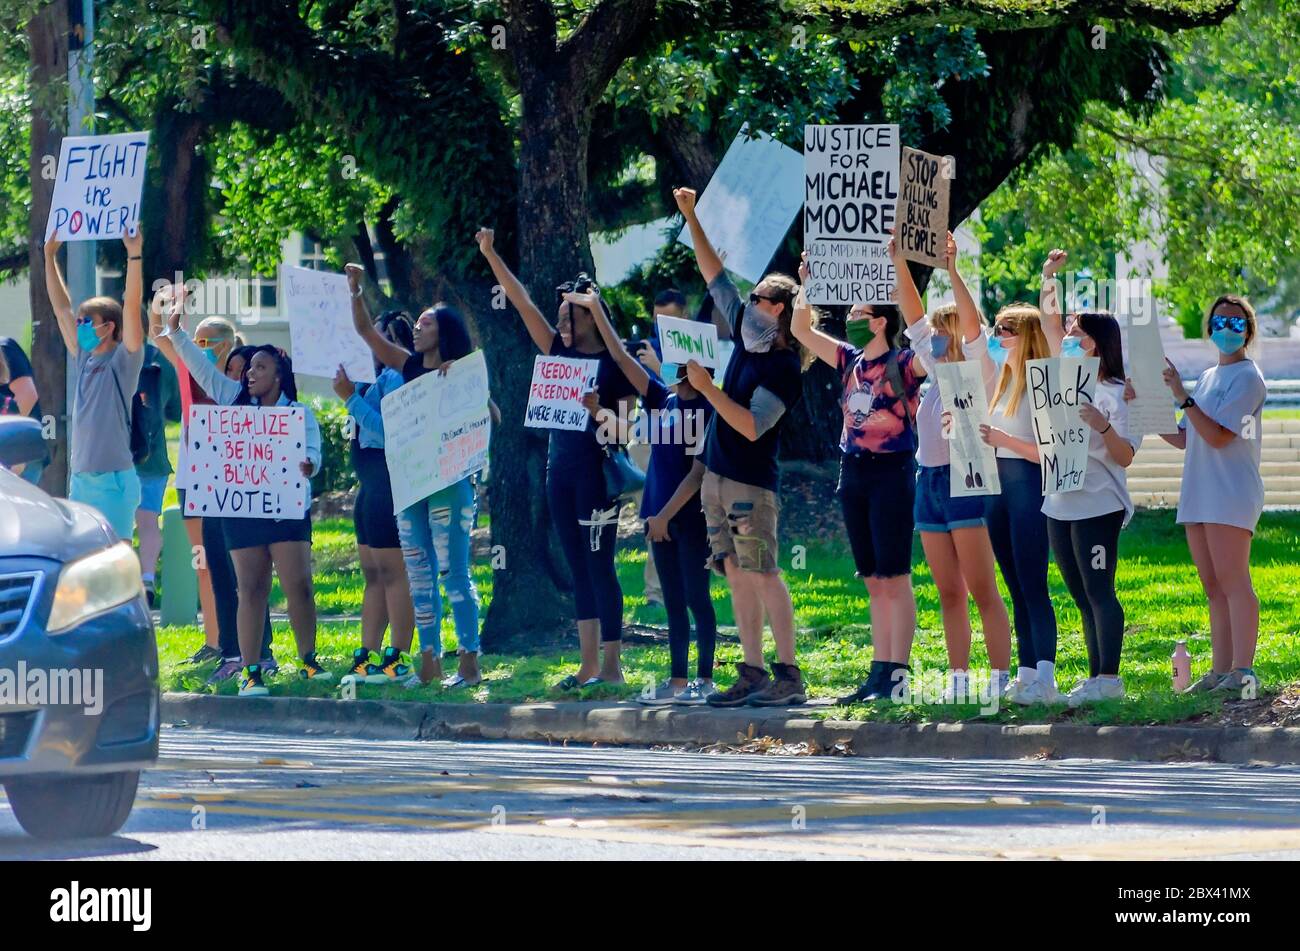 Protestors wave signs while at a protest against police brutality, June 4, 2020, at Memorial Park in Mobile, Alabama. Stock Photo